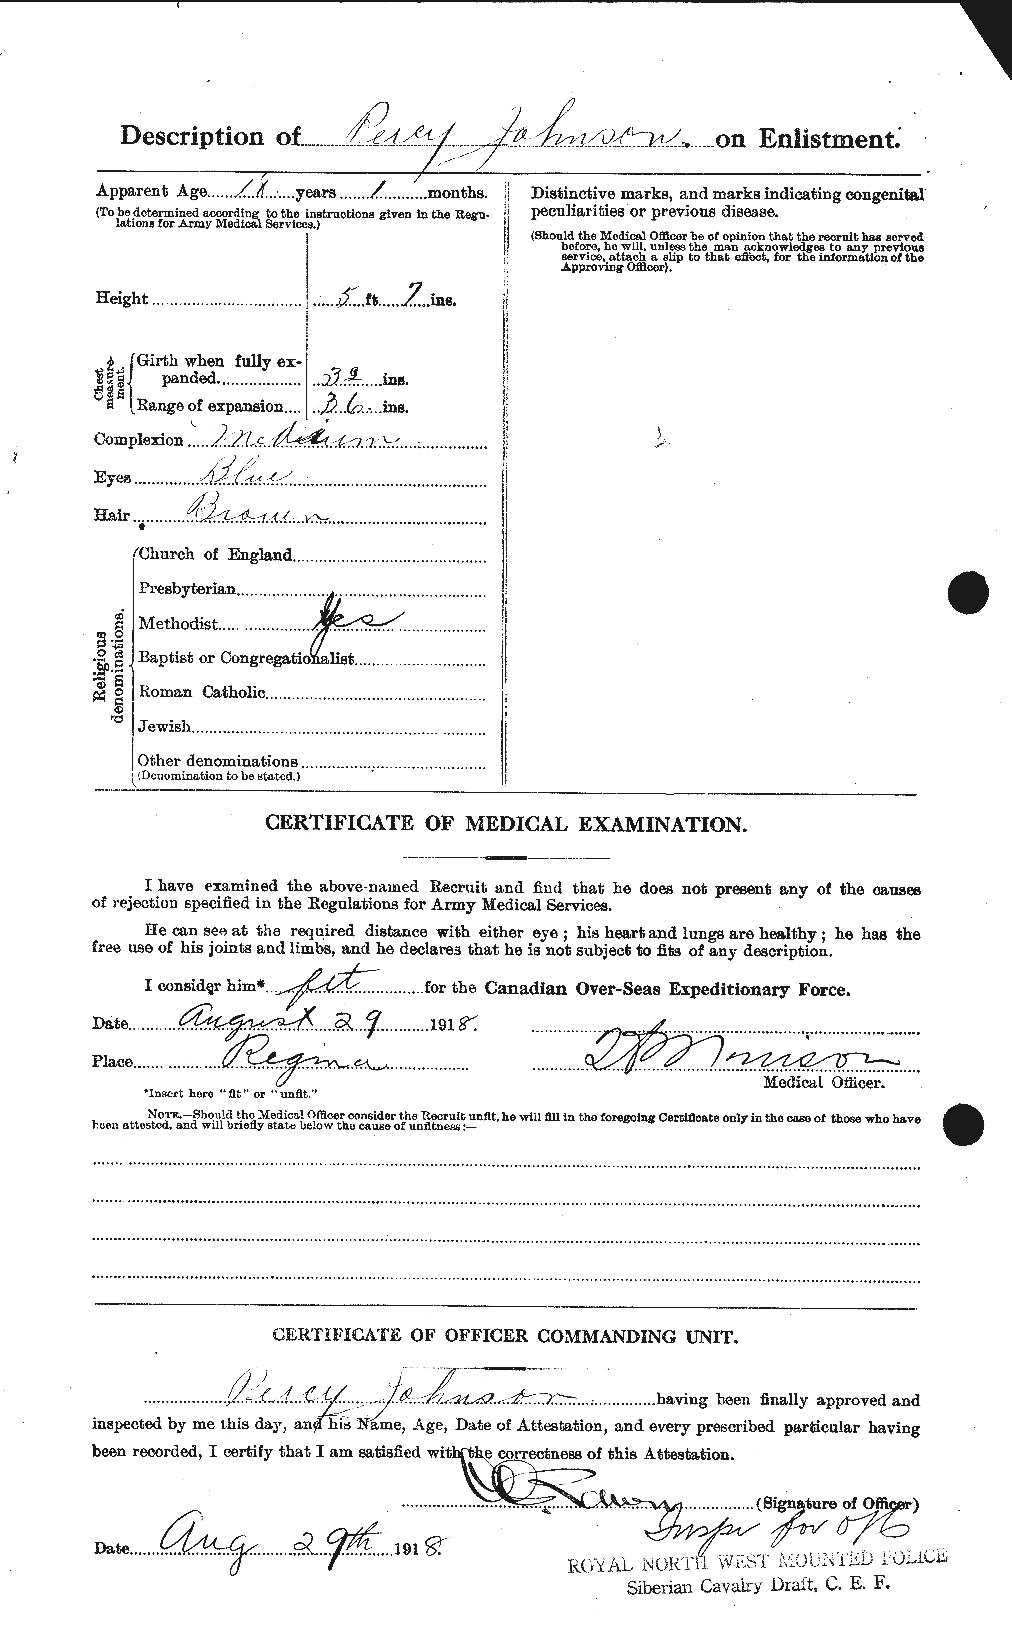 Personnel Records of the First World War - CEF 417260b